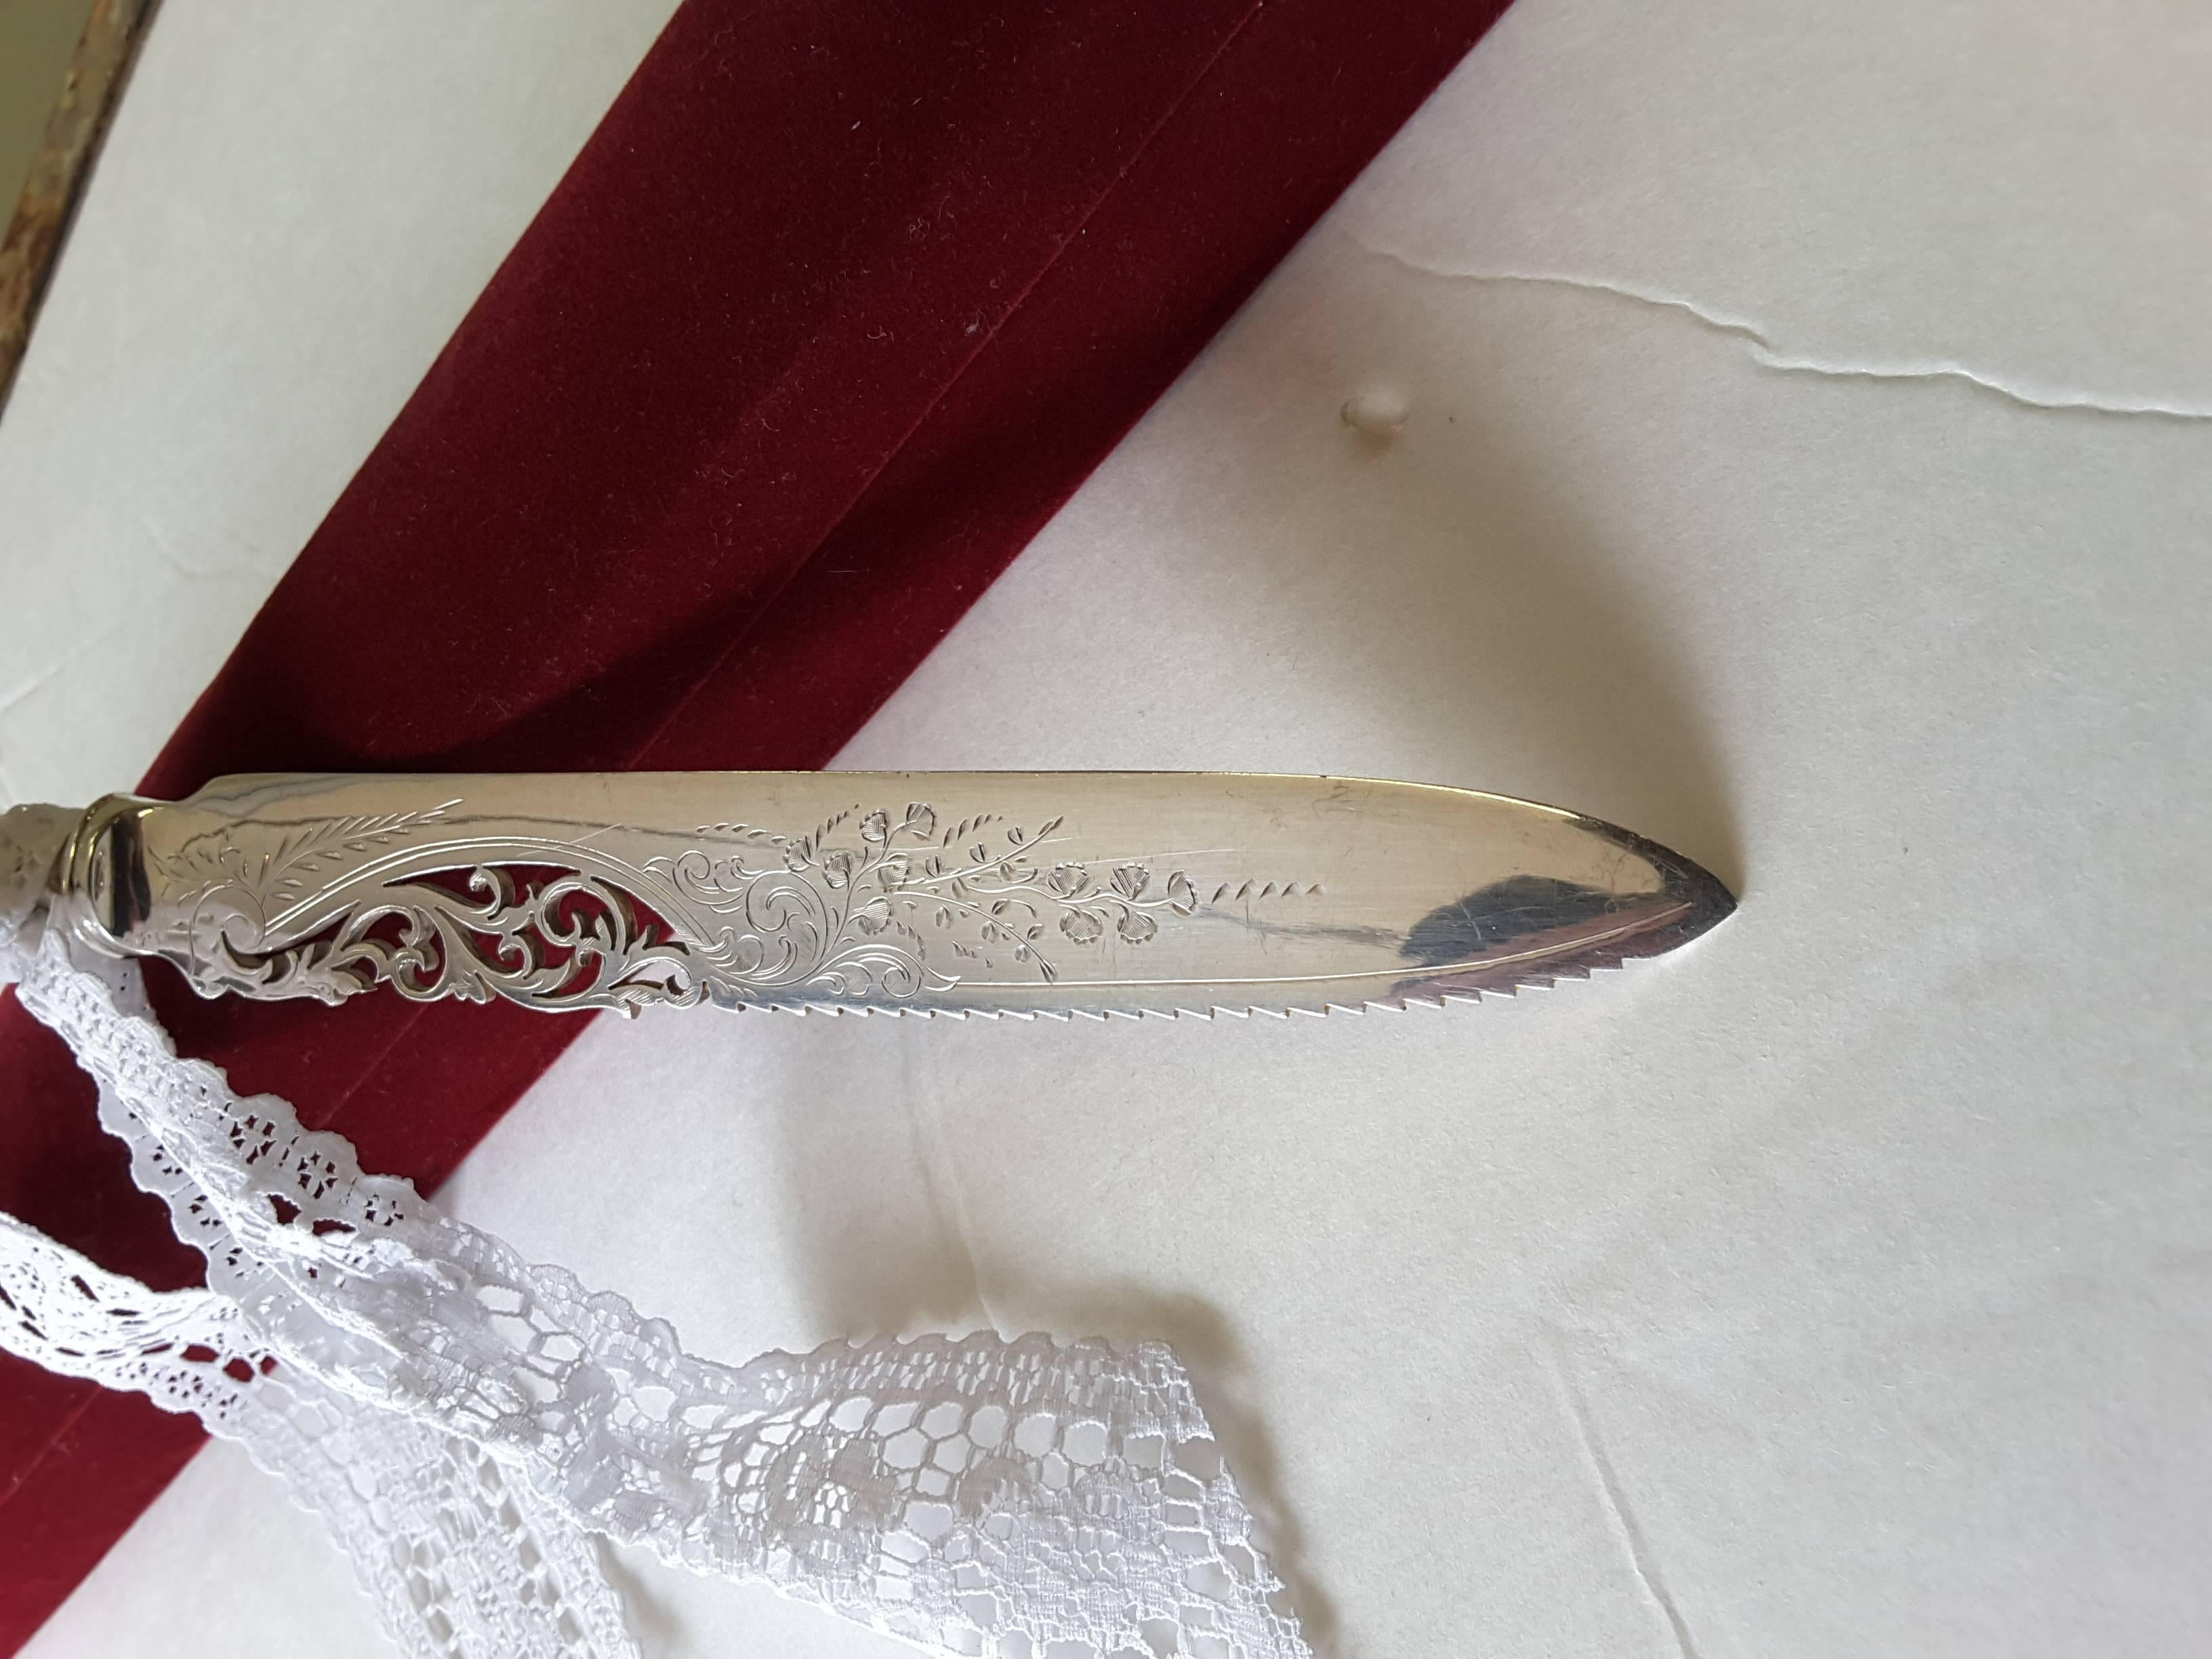 Bridal wedding cake ceremony sterling silver cutting knife, pierced decorated knife blade and decorated handle. The blade is decorated with a floral motif and serrated blade. The handle is marked Sterling, Birks (maker). The knife is 11